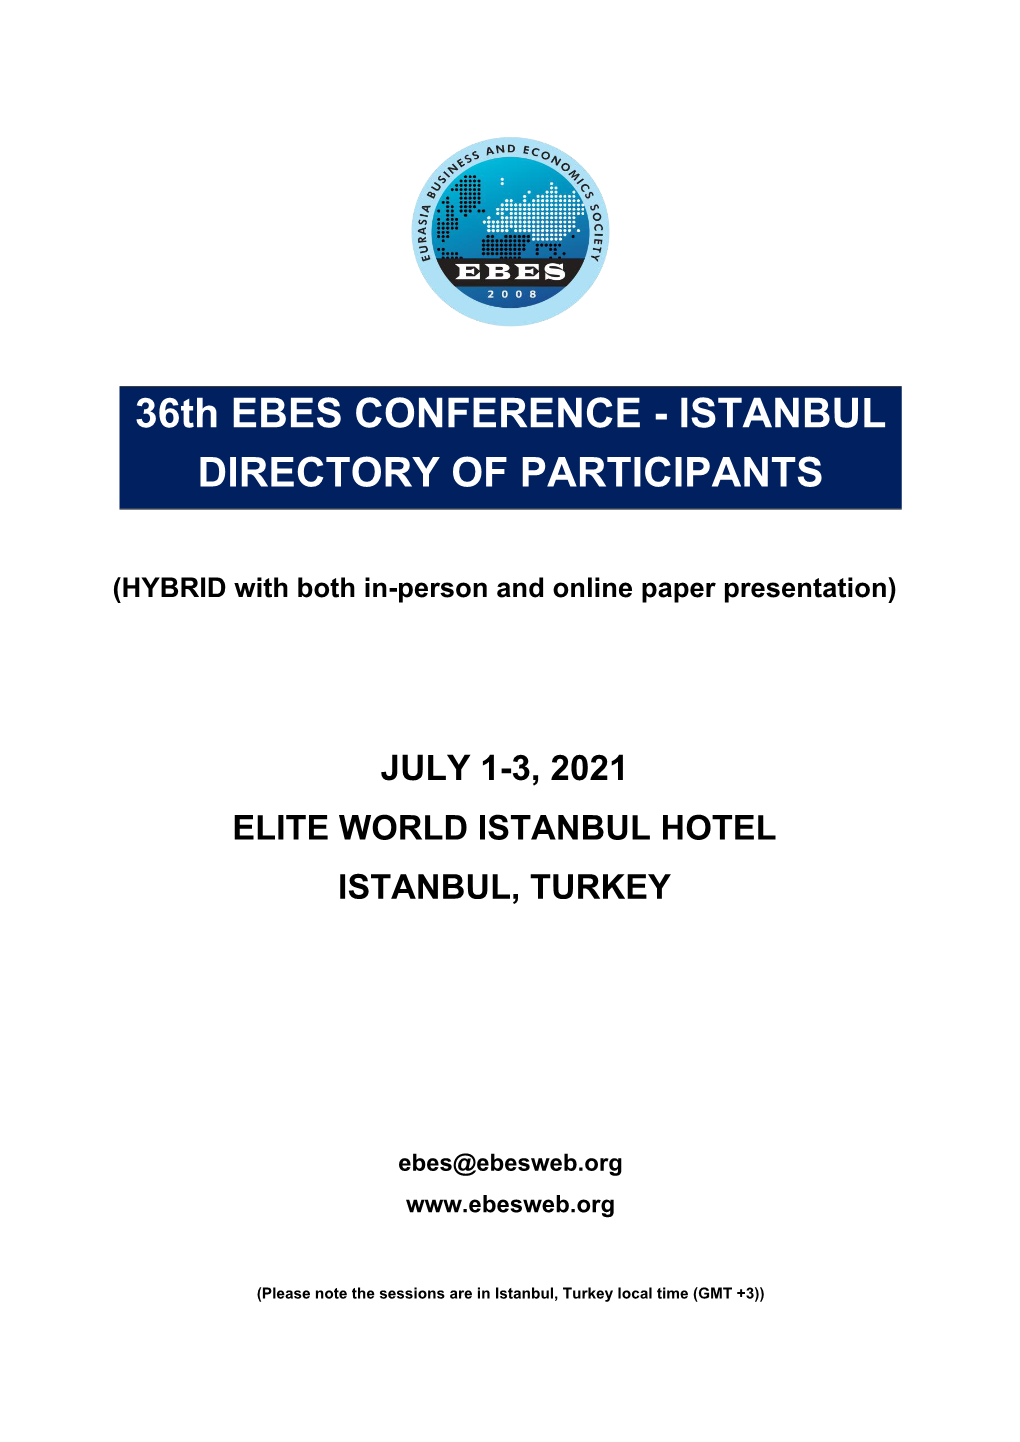 36Th EBES CONFERENCE - ISTANBUL DIRECTORY of PARTICIPANTS